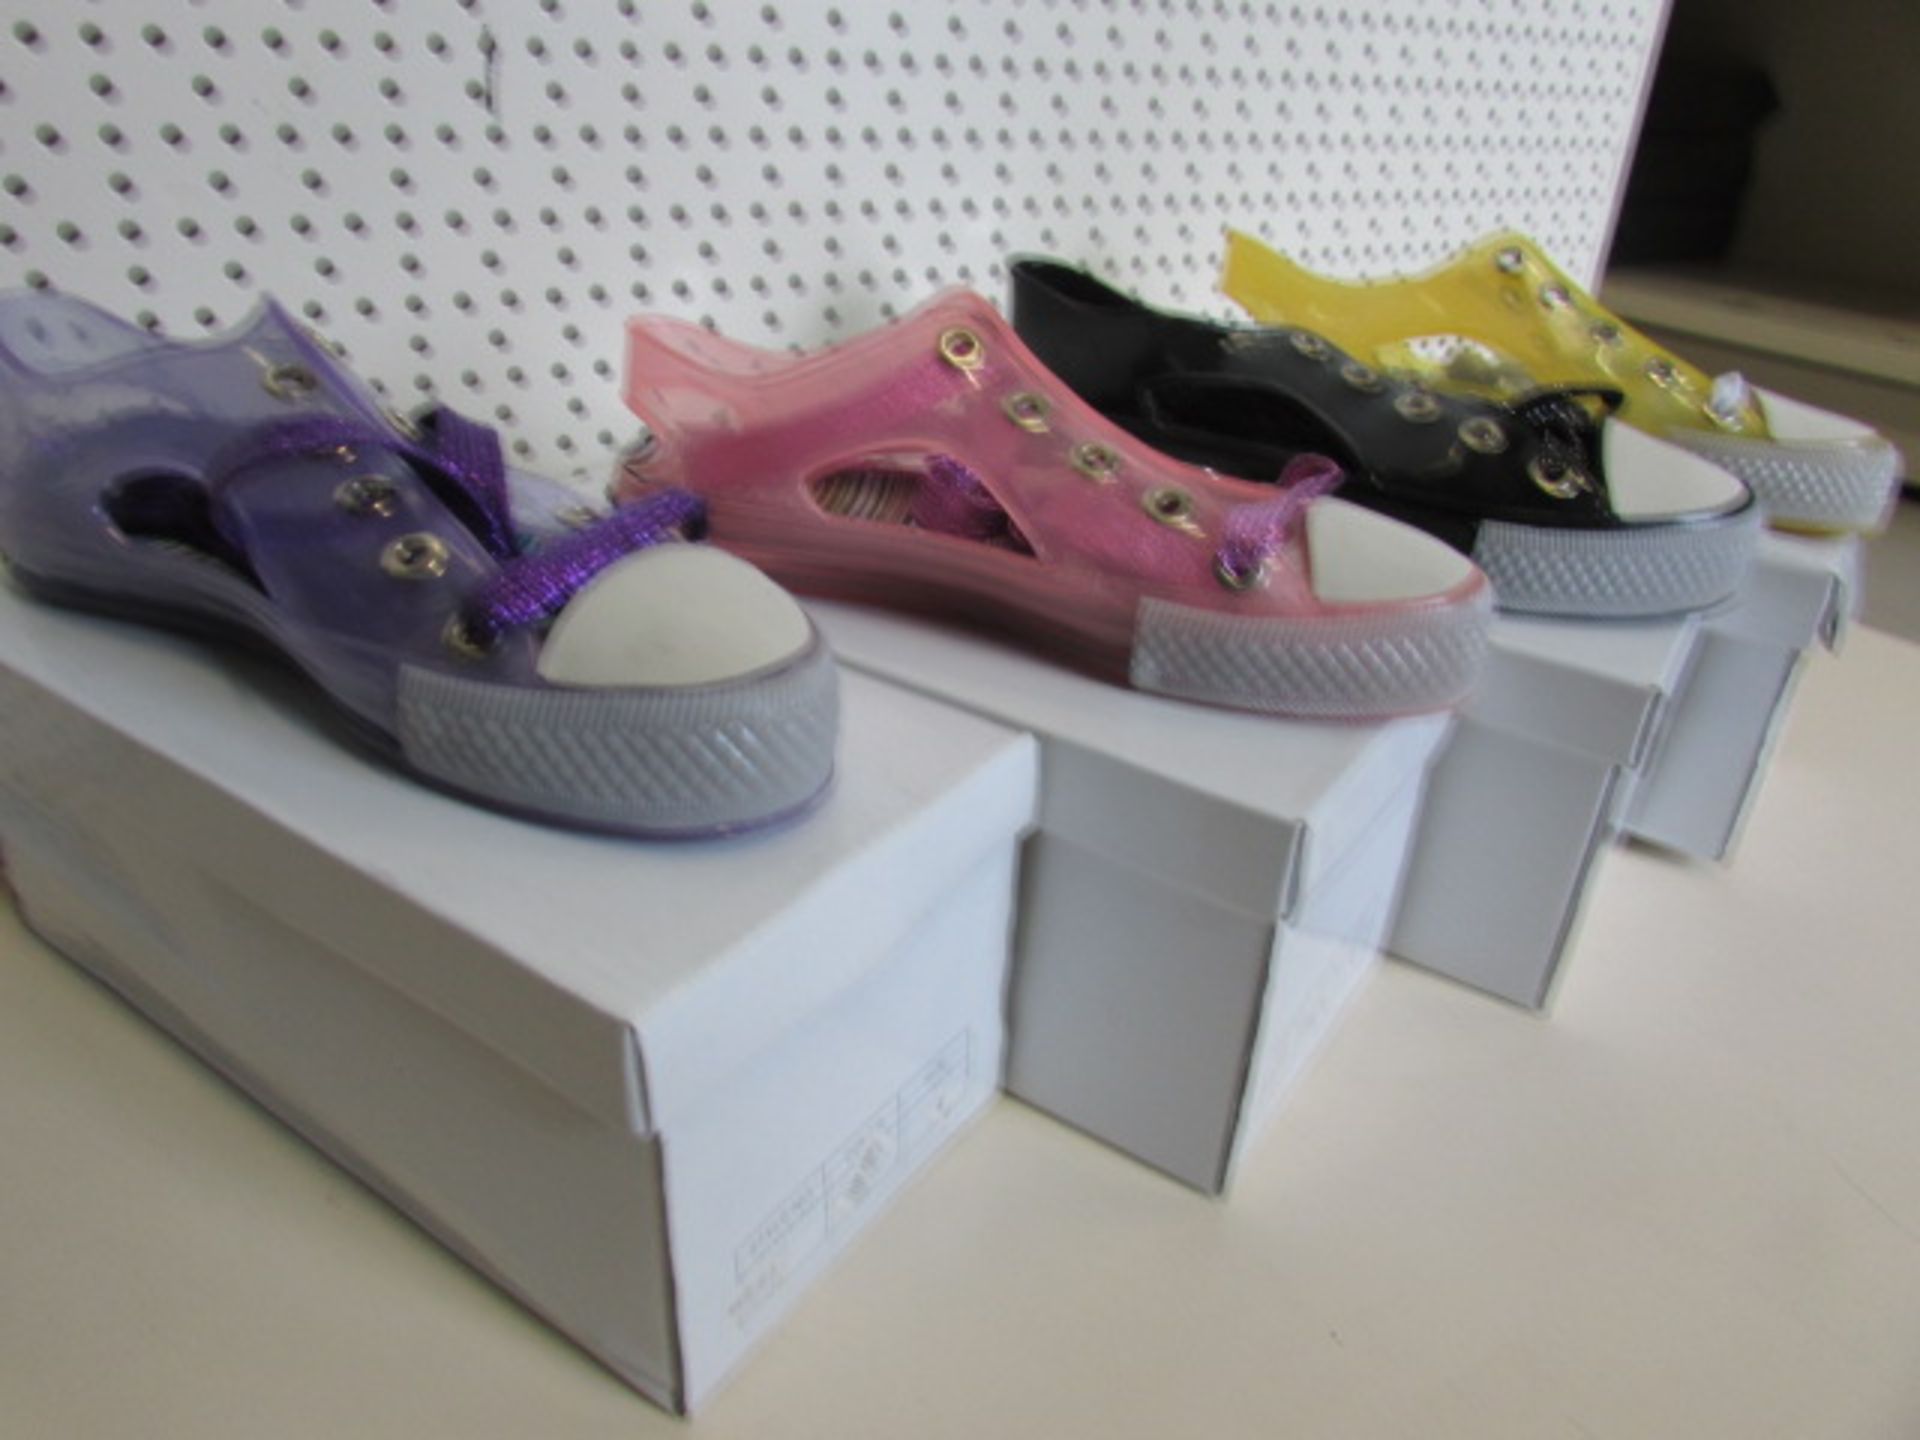 25 x Cyclone Paradise Lace Up Shoes In Various Sizes & Colours - Image 3 of 3